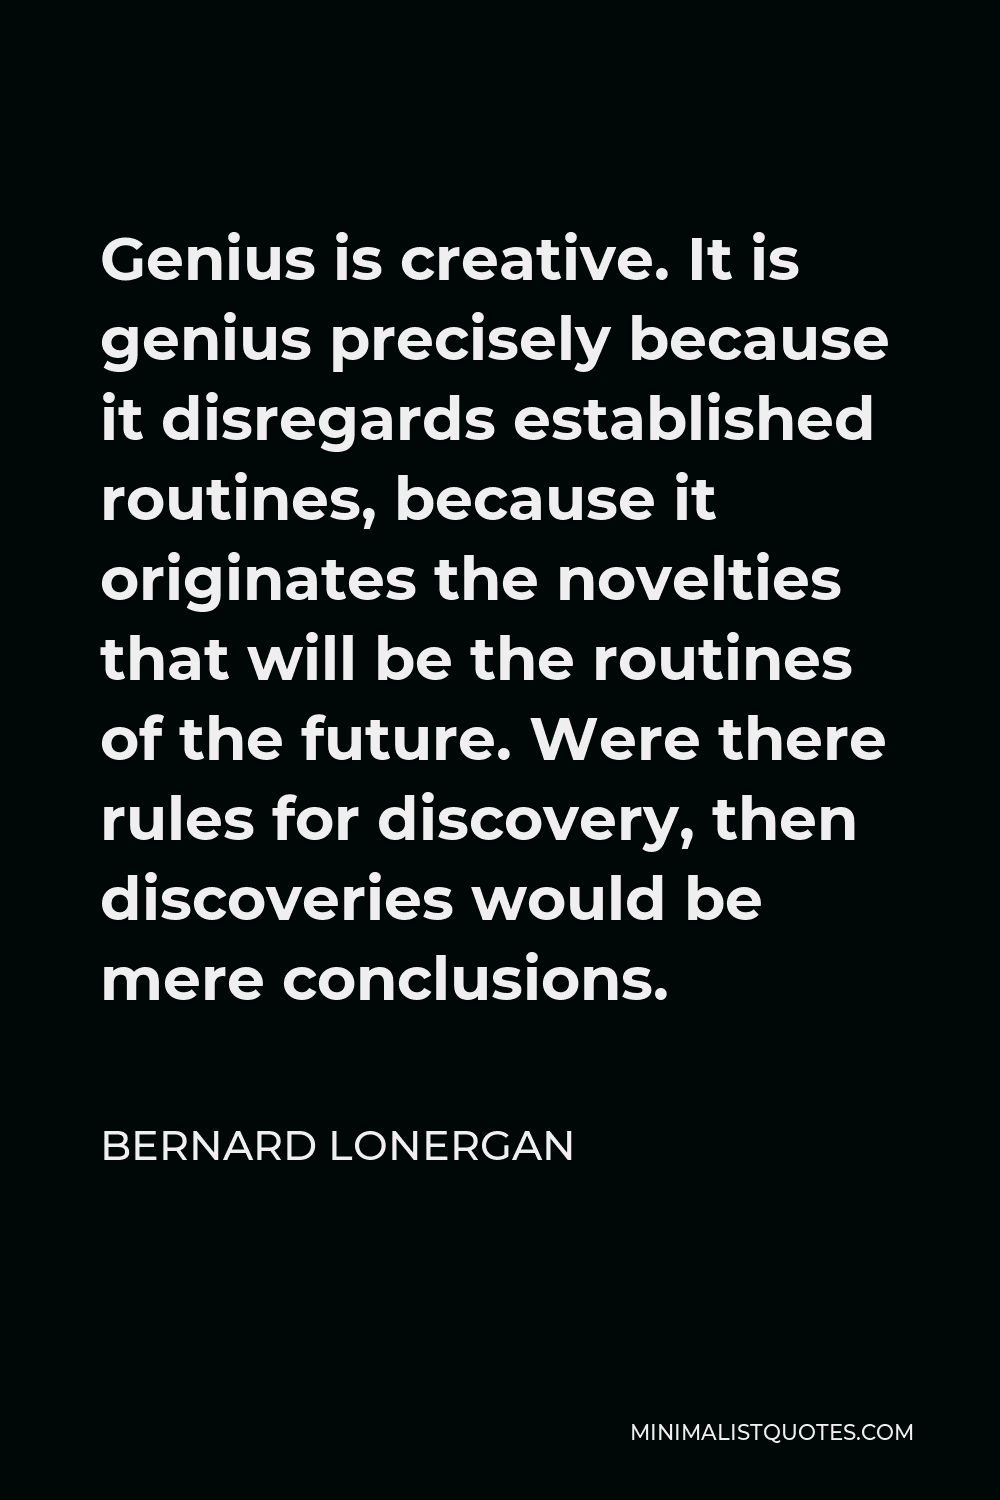 Bernard Lonergan Quote - Genius is creative. It is genius precisely because it disregards established routines, because it originates the novelties that will be the routines of the future. Were there rules for discovery, then discoveries would be mere conclusions.